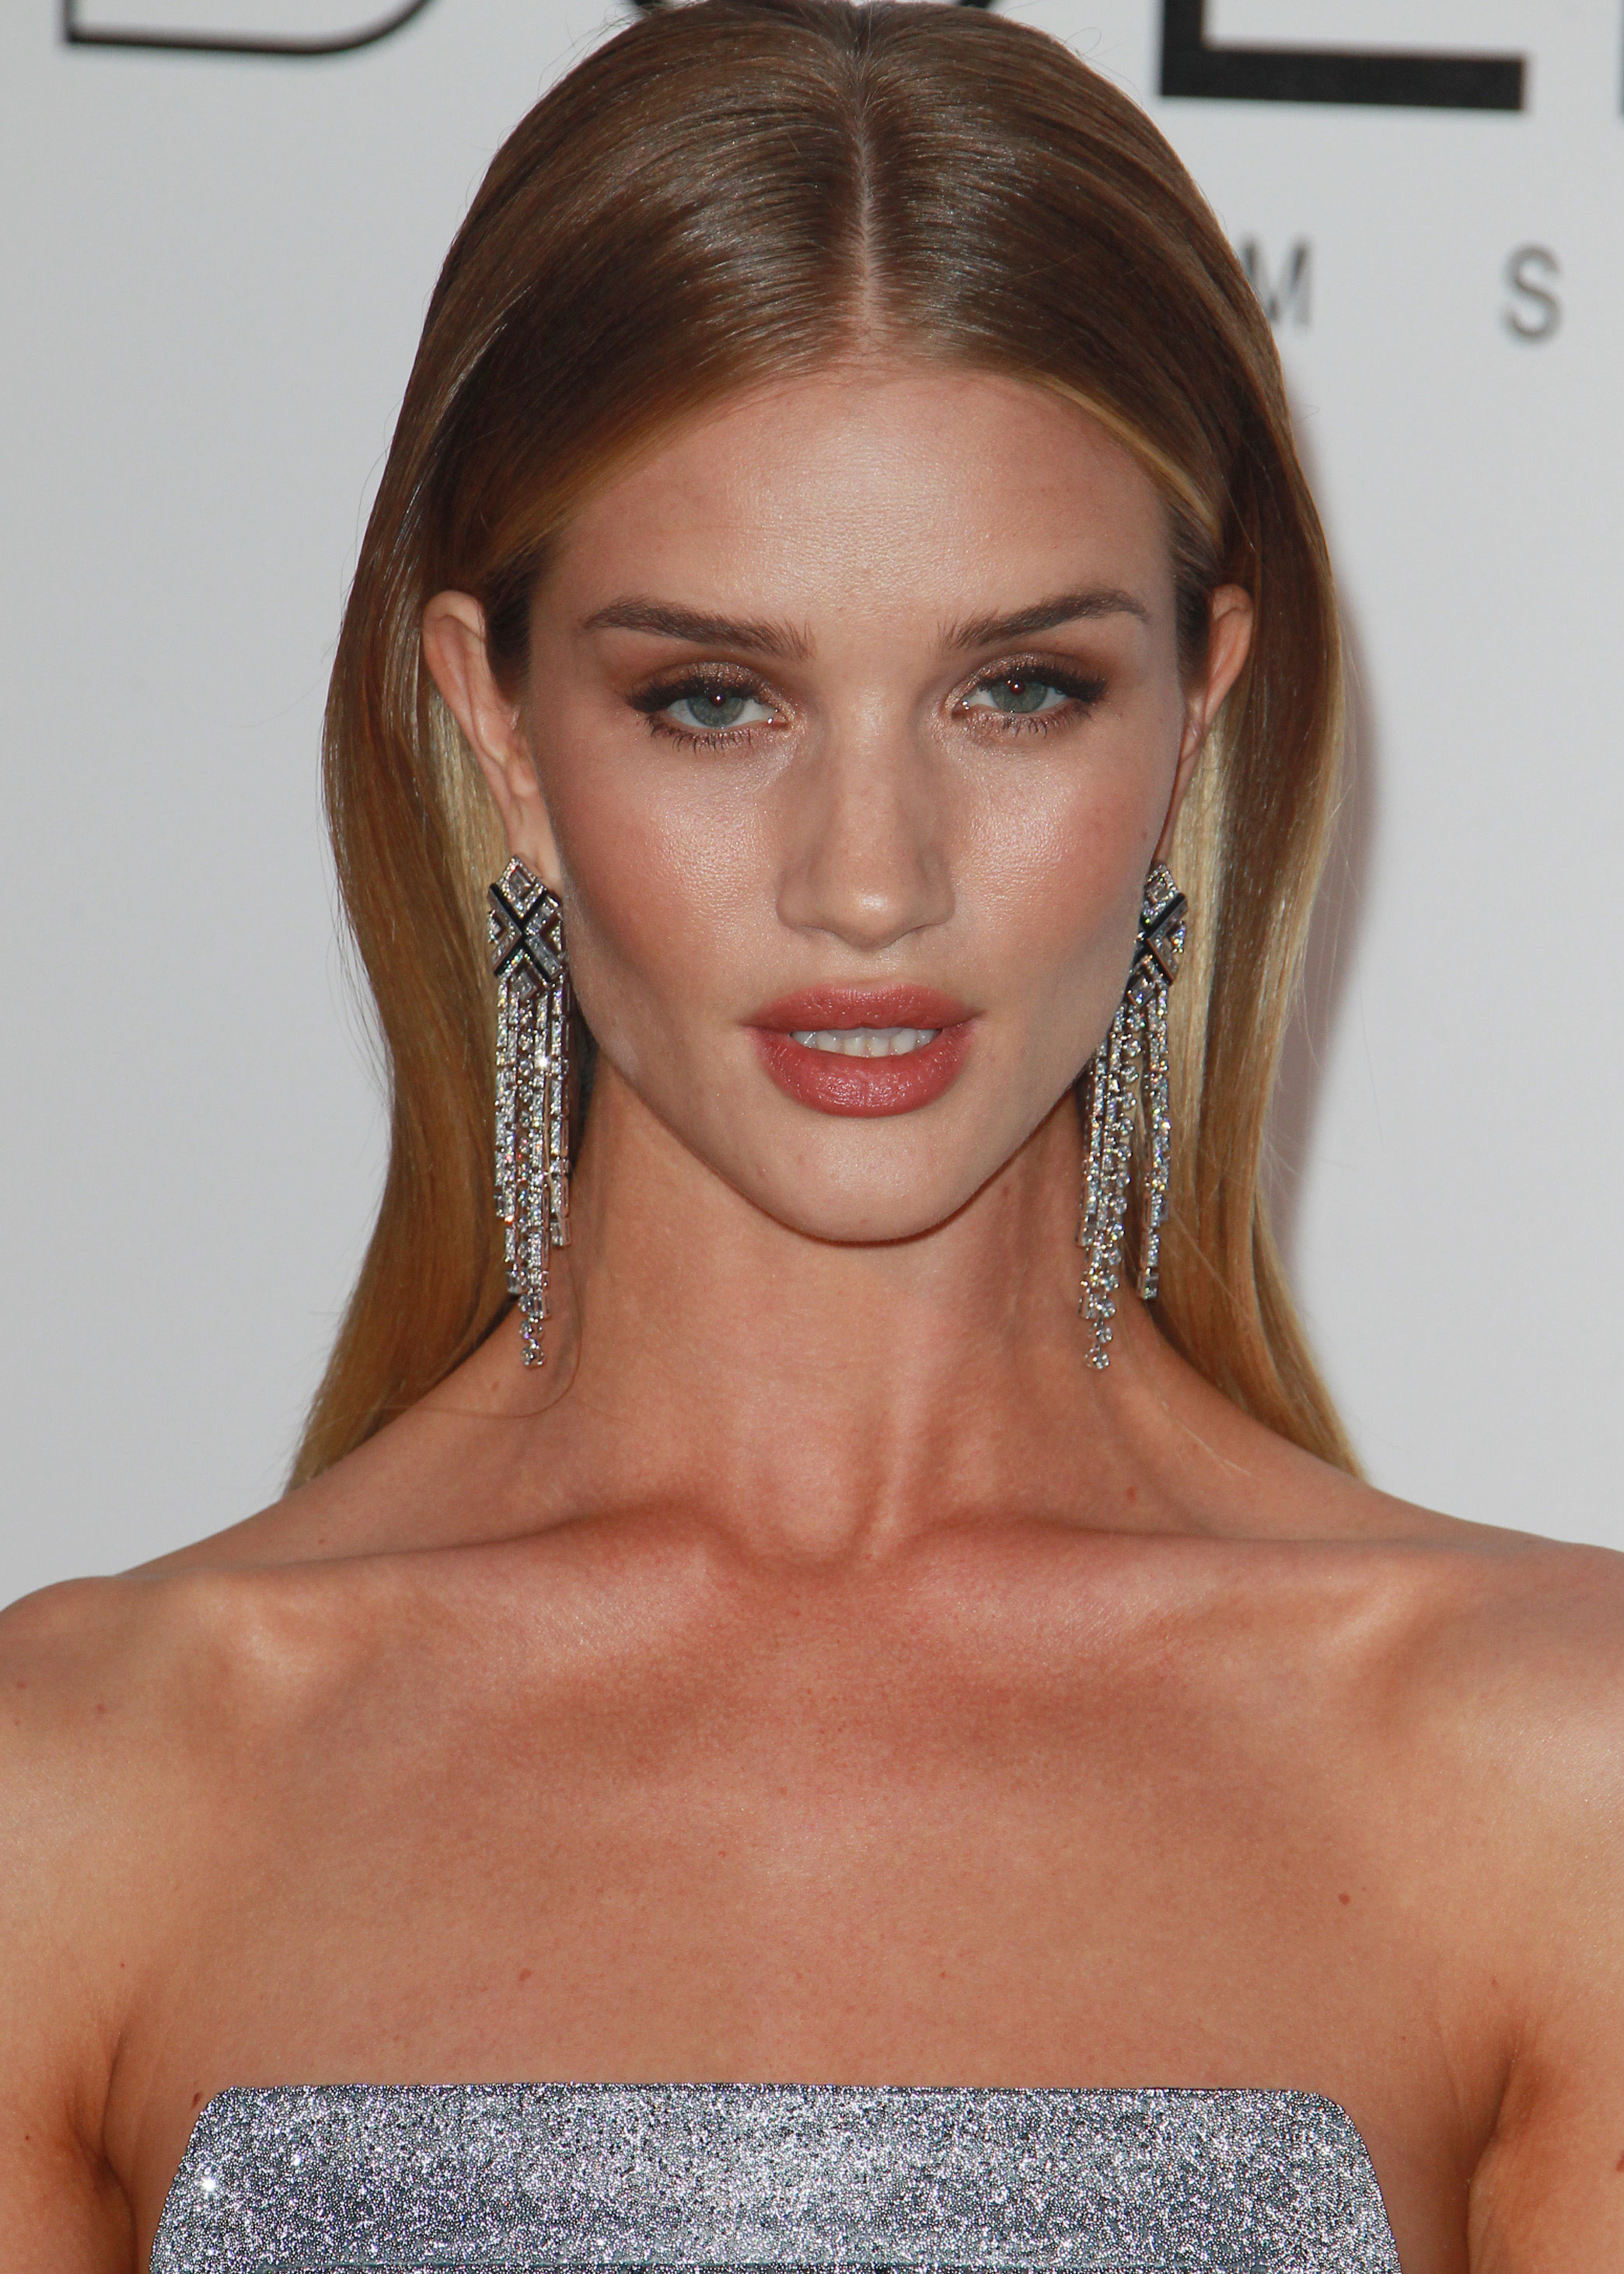 Draping Is The Latest Beauty Trend